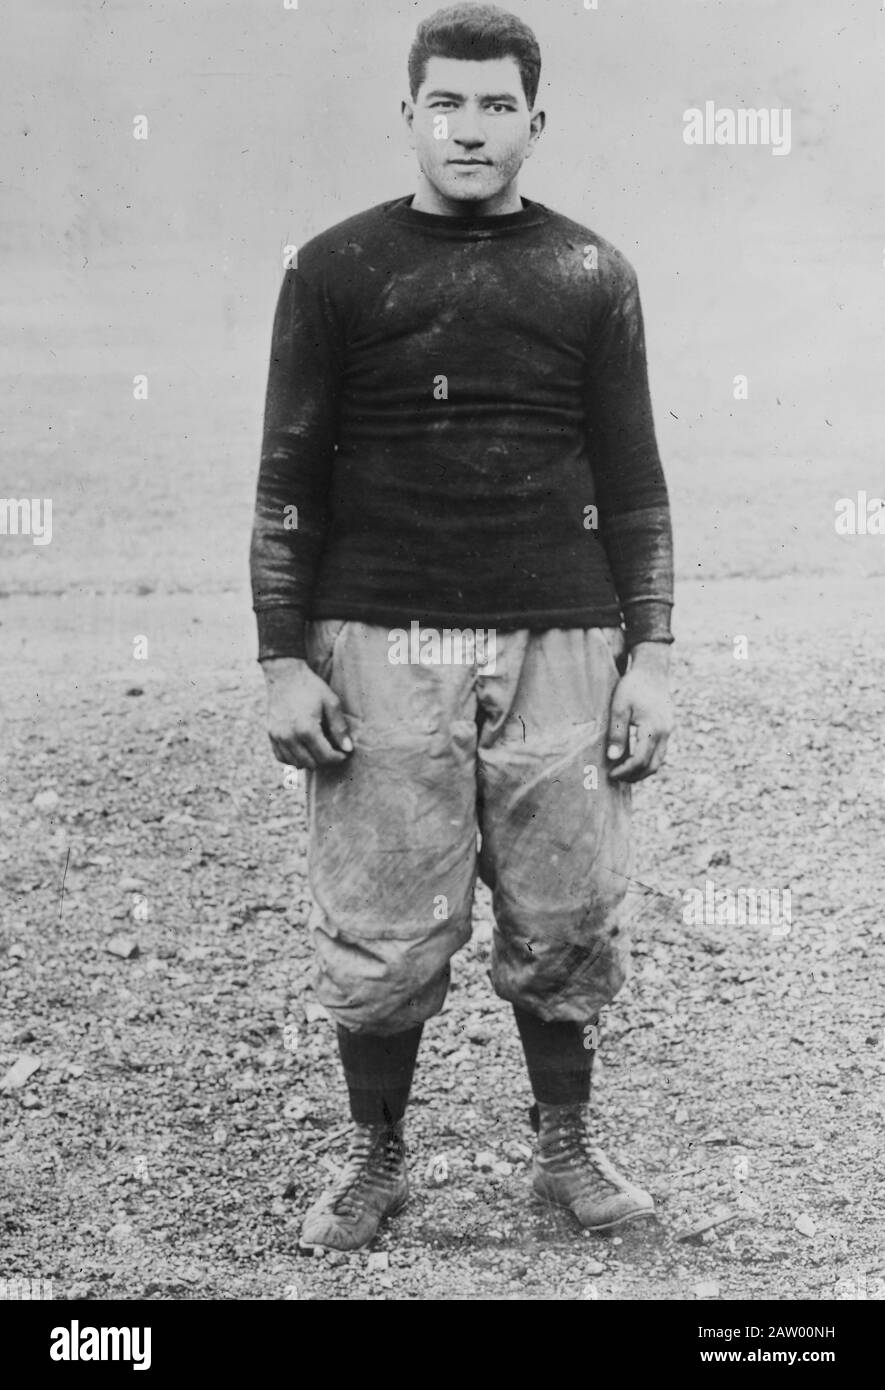 Philip J. Welmas, an American Indian professional football player in the early National Football League Stock Photo